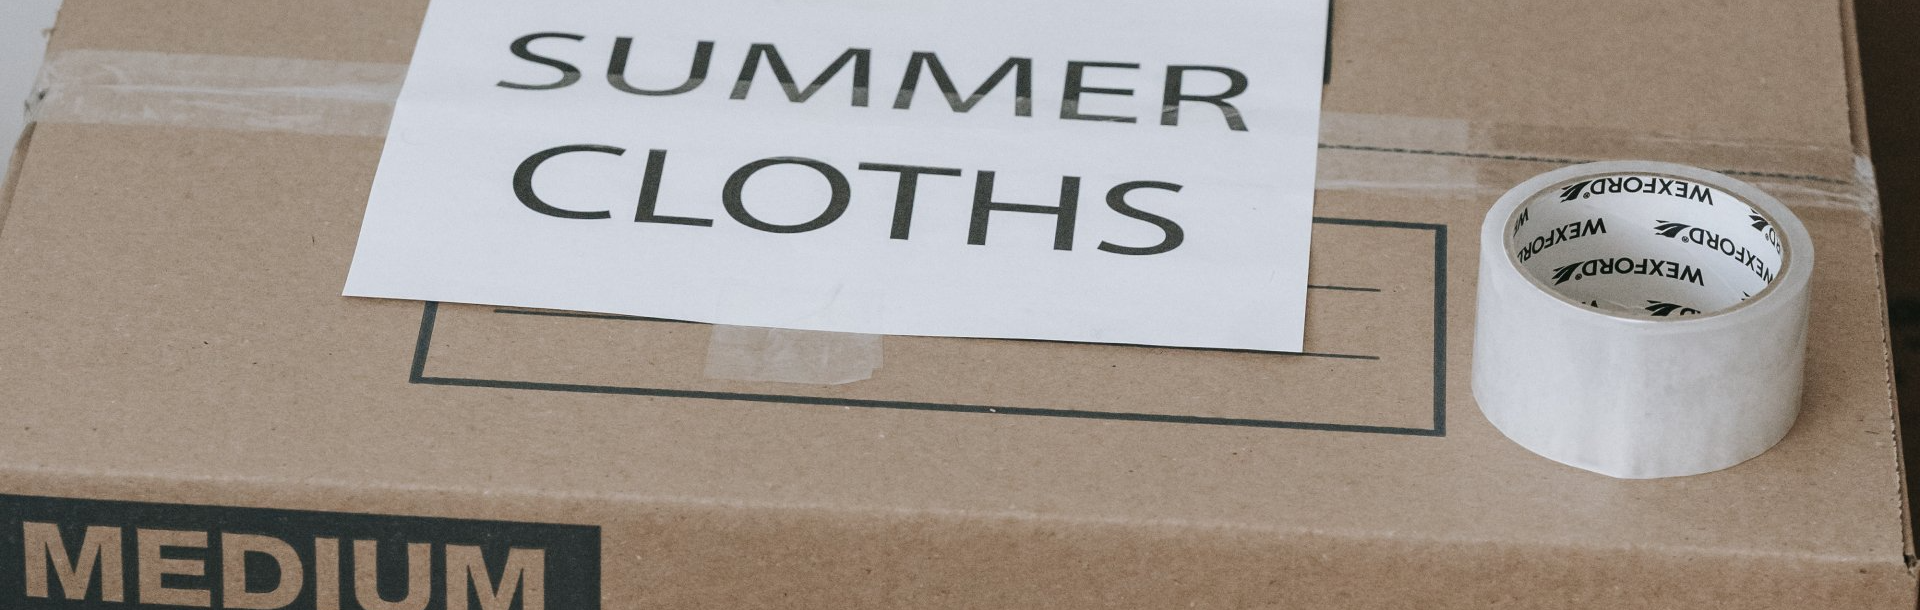 Summer Clothes in a Box